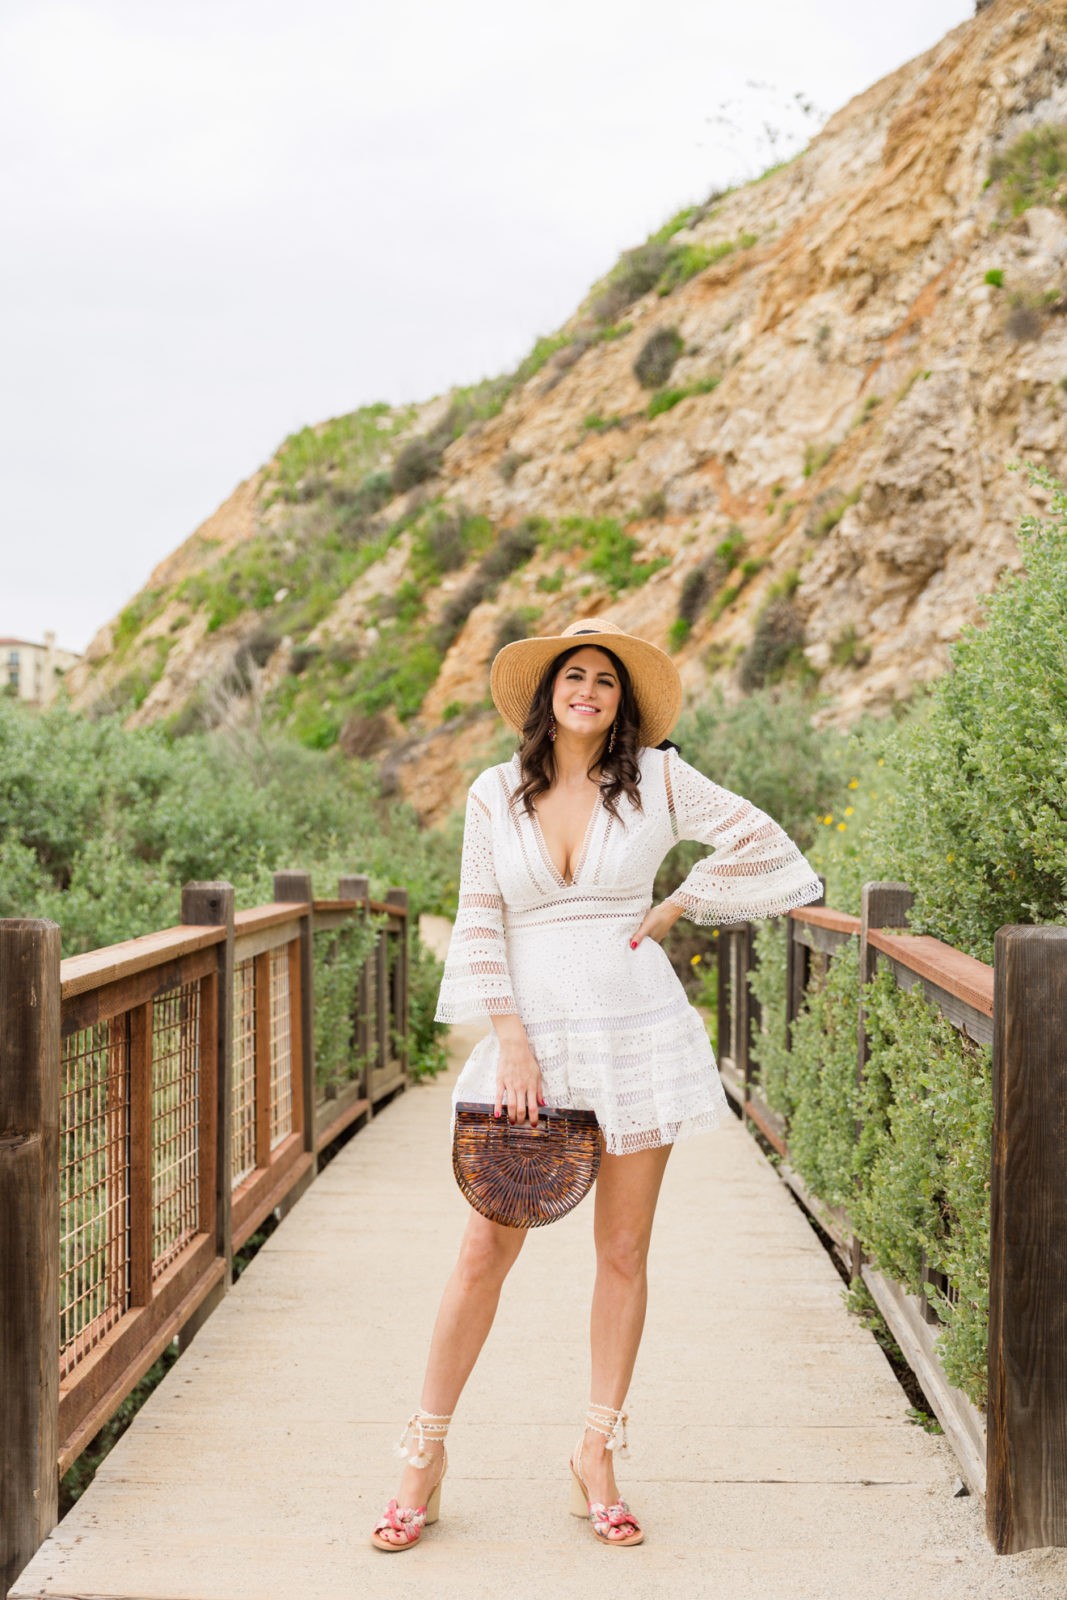 https://www.lauralily.com/wp-content/uploads/2019/03/Red-Dress-Boutique-White-Eyelet-Dress-Resort-Wear-Outfits-by-Fashion-Blogger-Laura-Lily-2.jpg